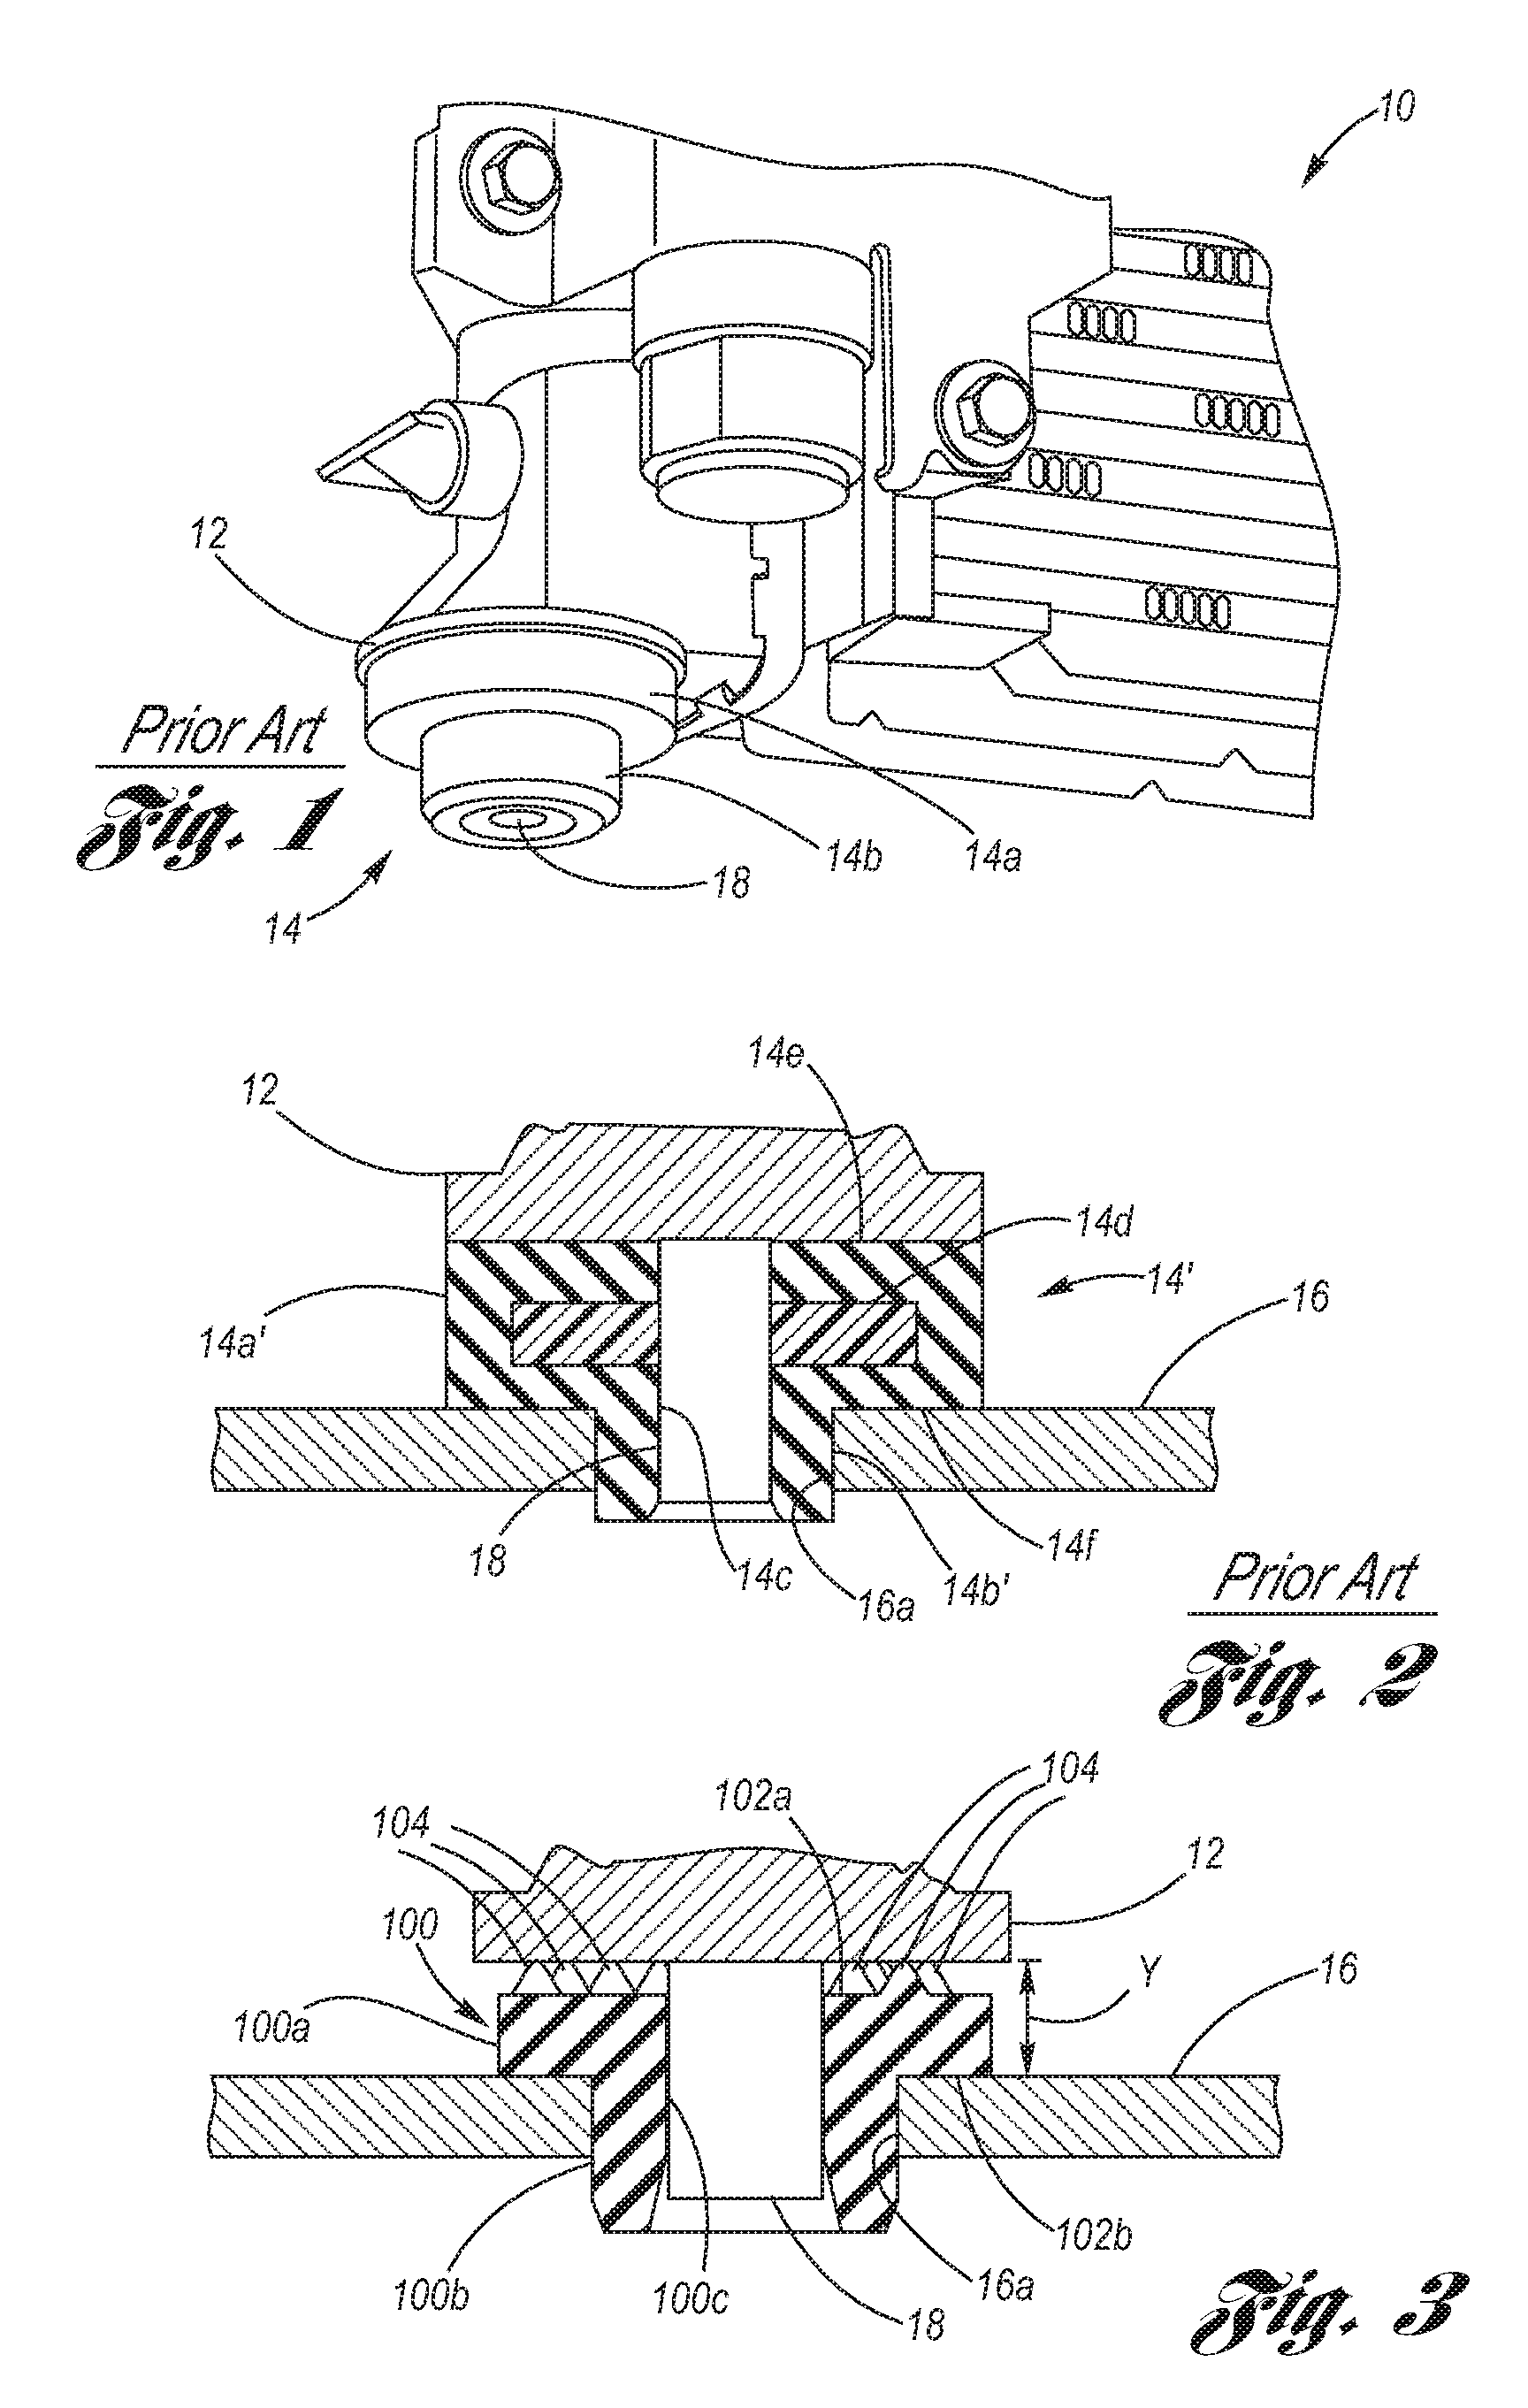 Resilient Vibration Isolator Having a Plurality of Bumps on an Engagement Surface Thereof